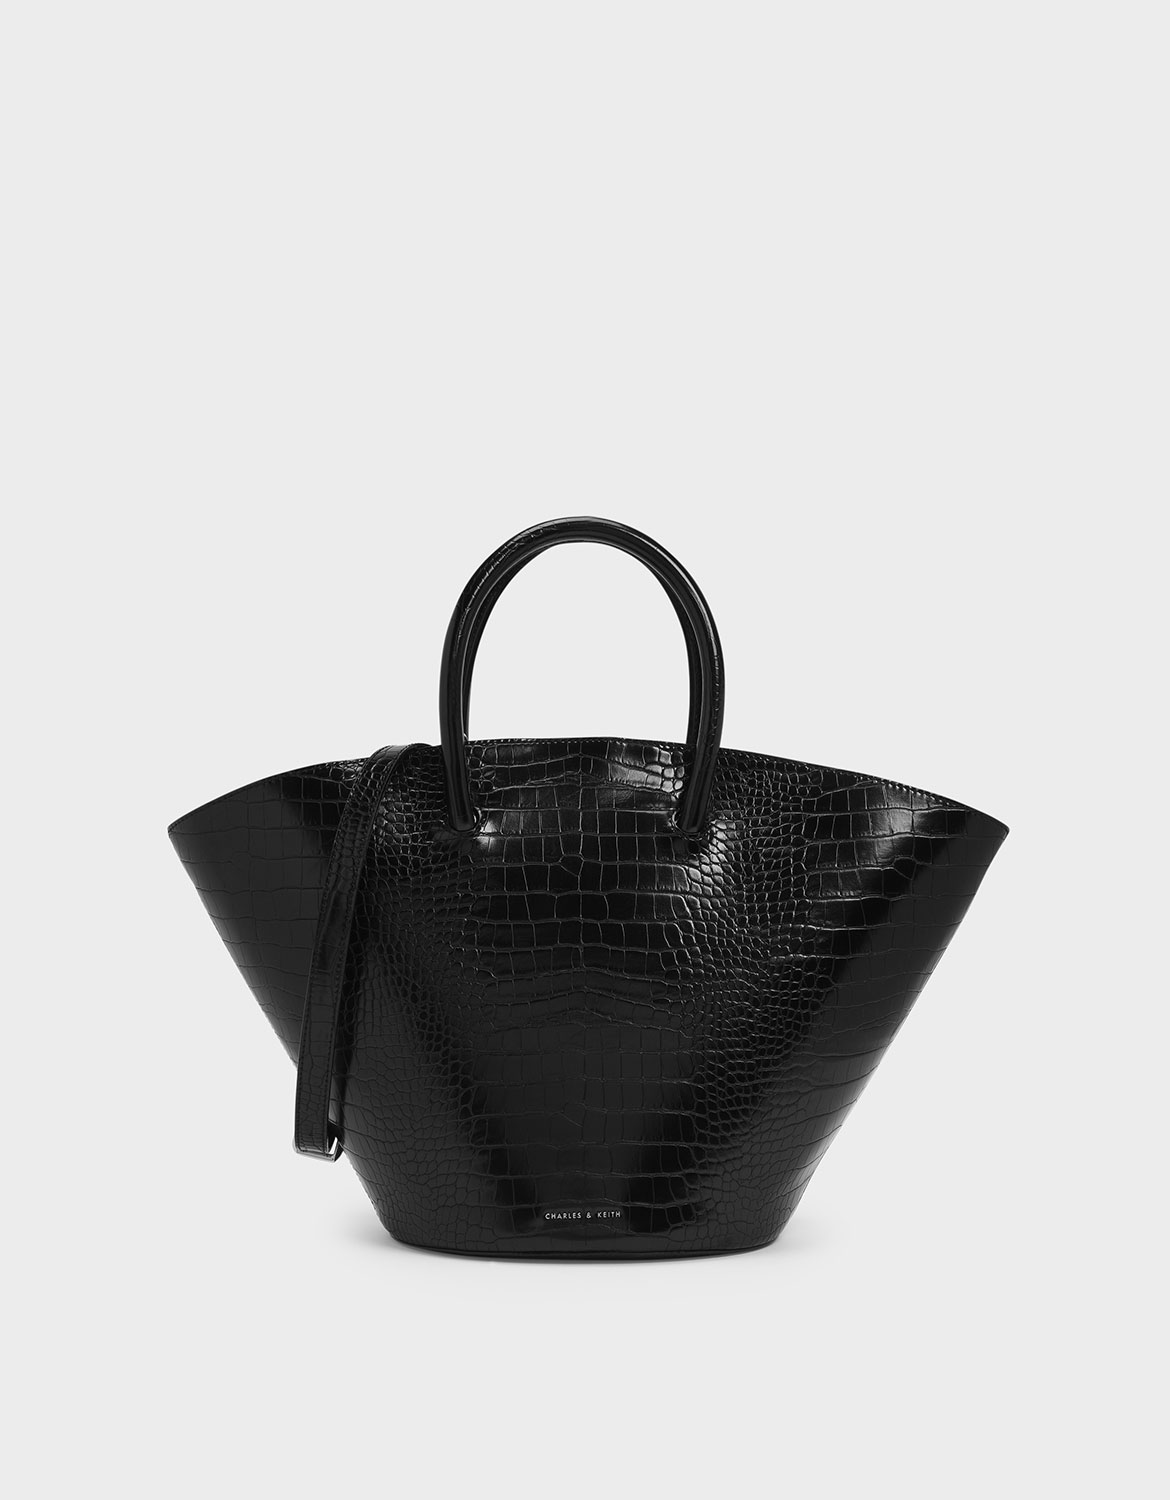 Women's Croc-Effect Large Trapeze Tote in black - CHARLES & KEITH